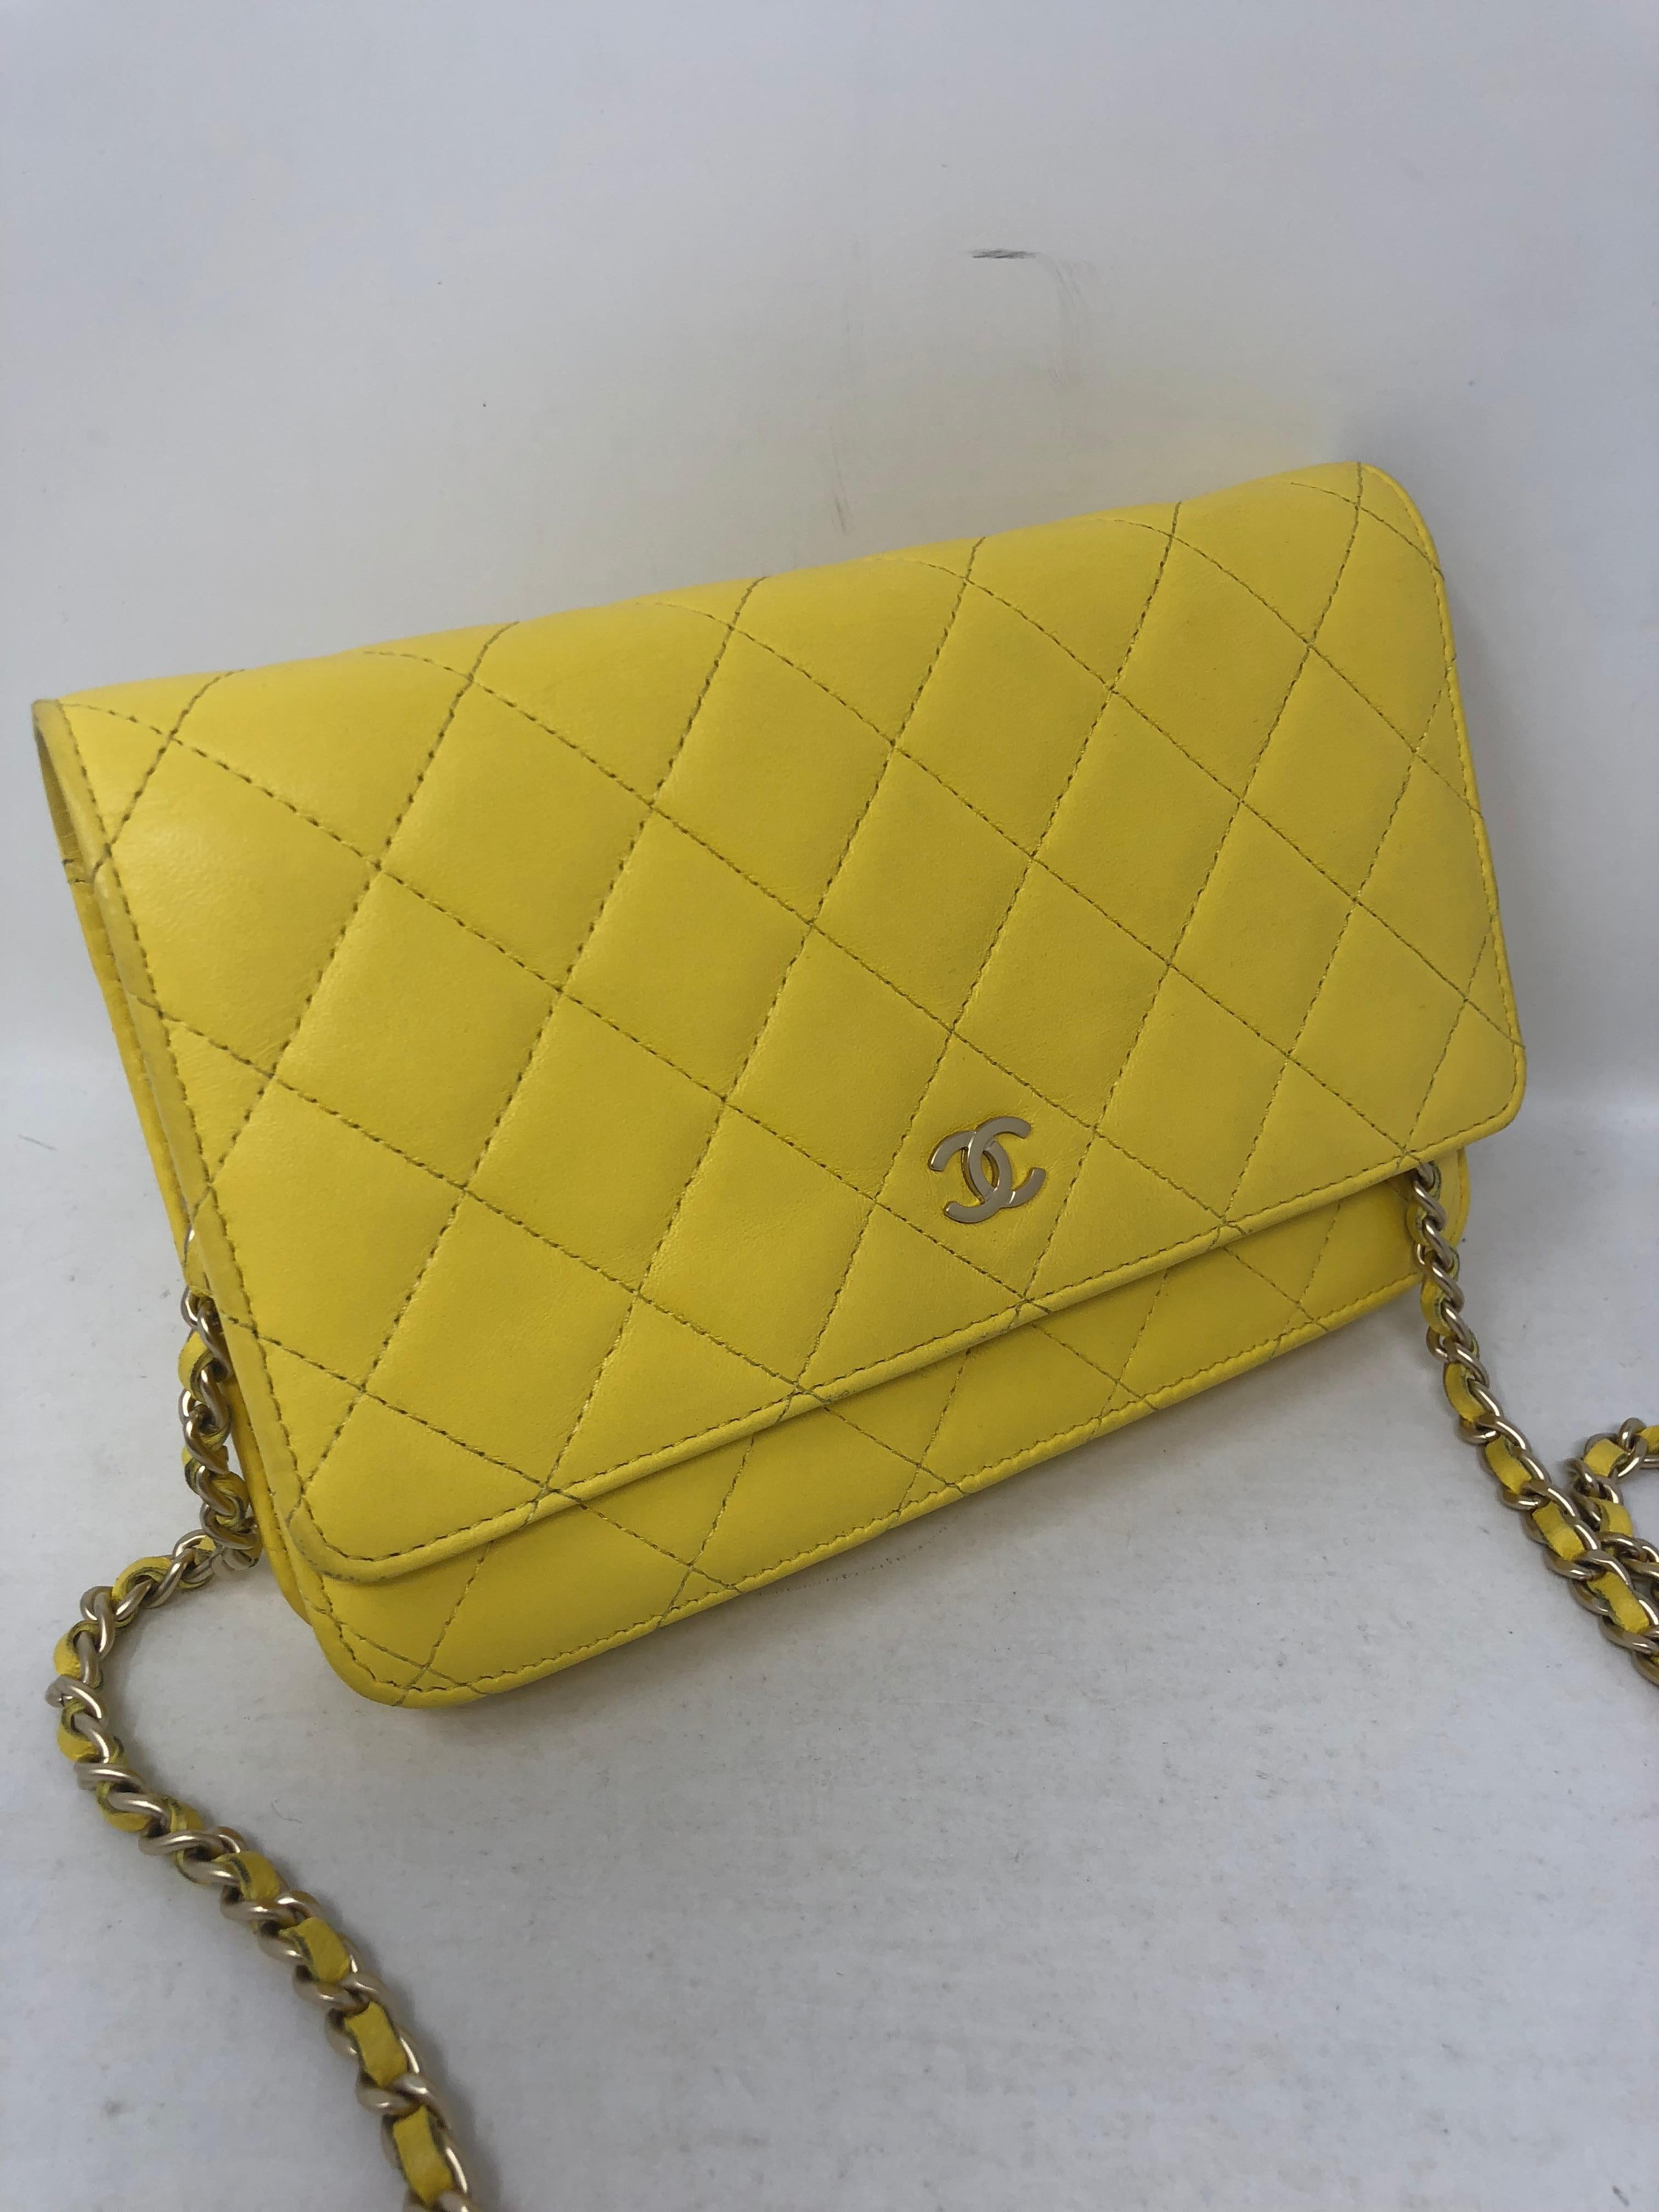 Women's or Men's Chanel Yellow Wallet on Chain